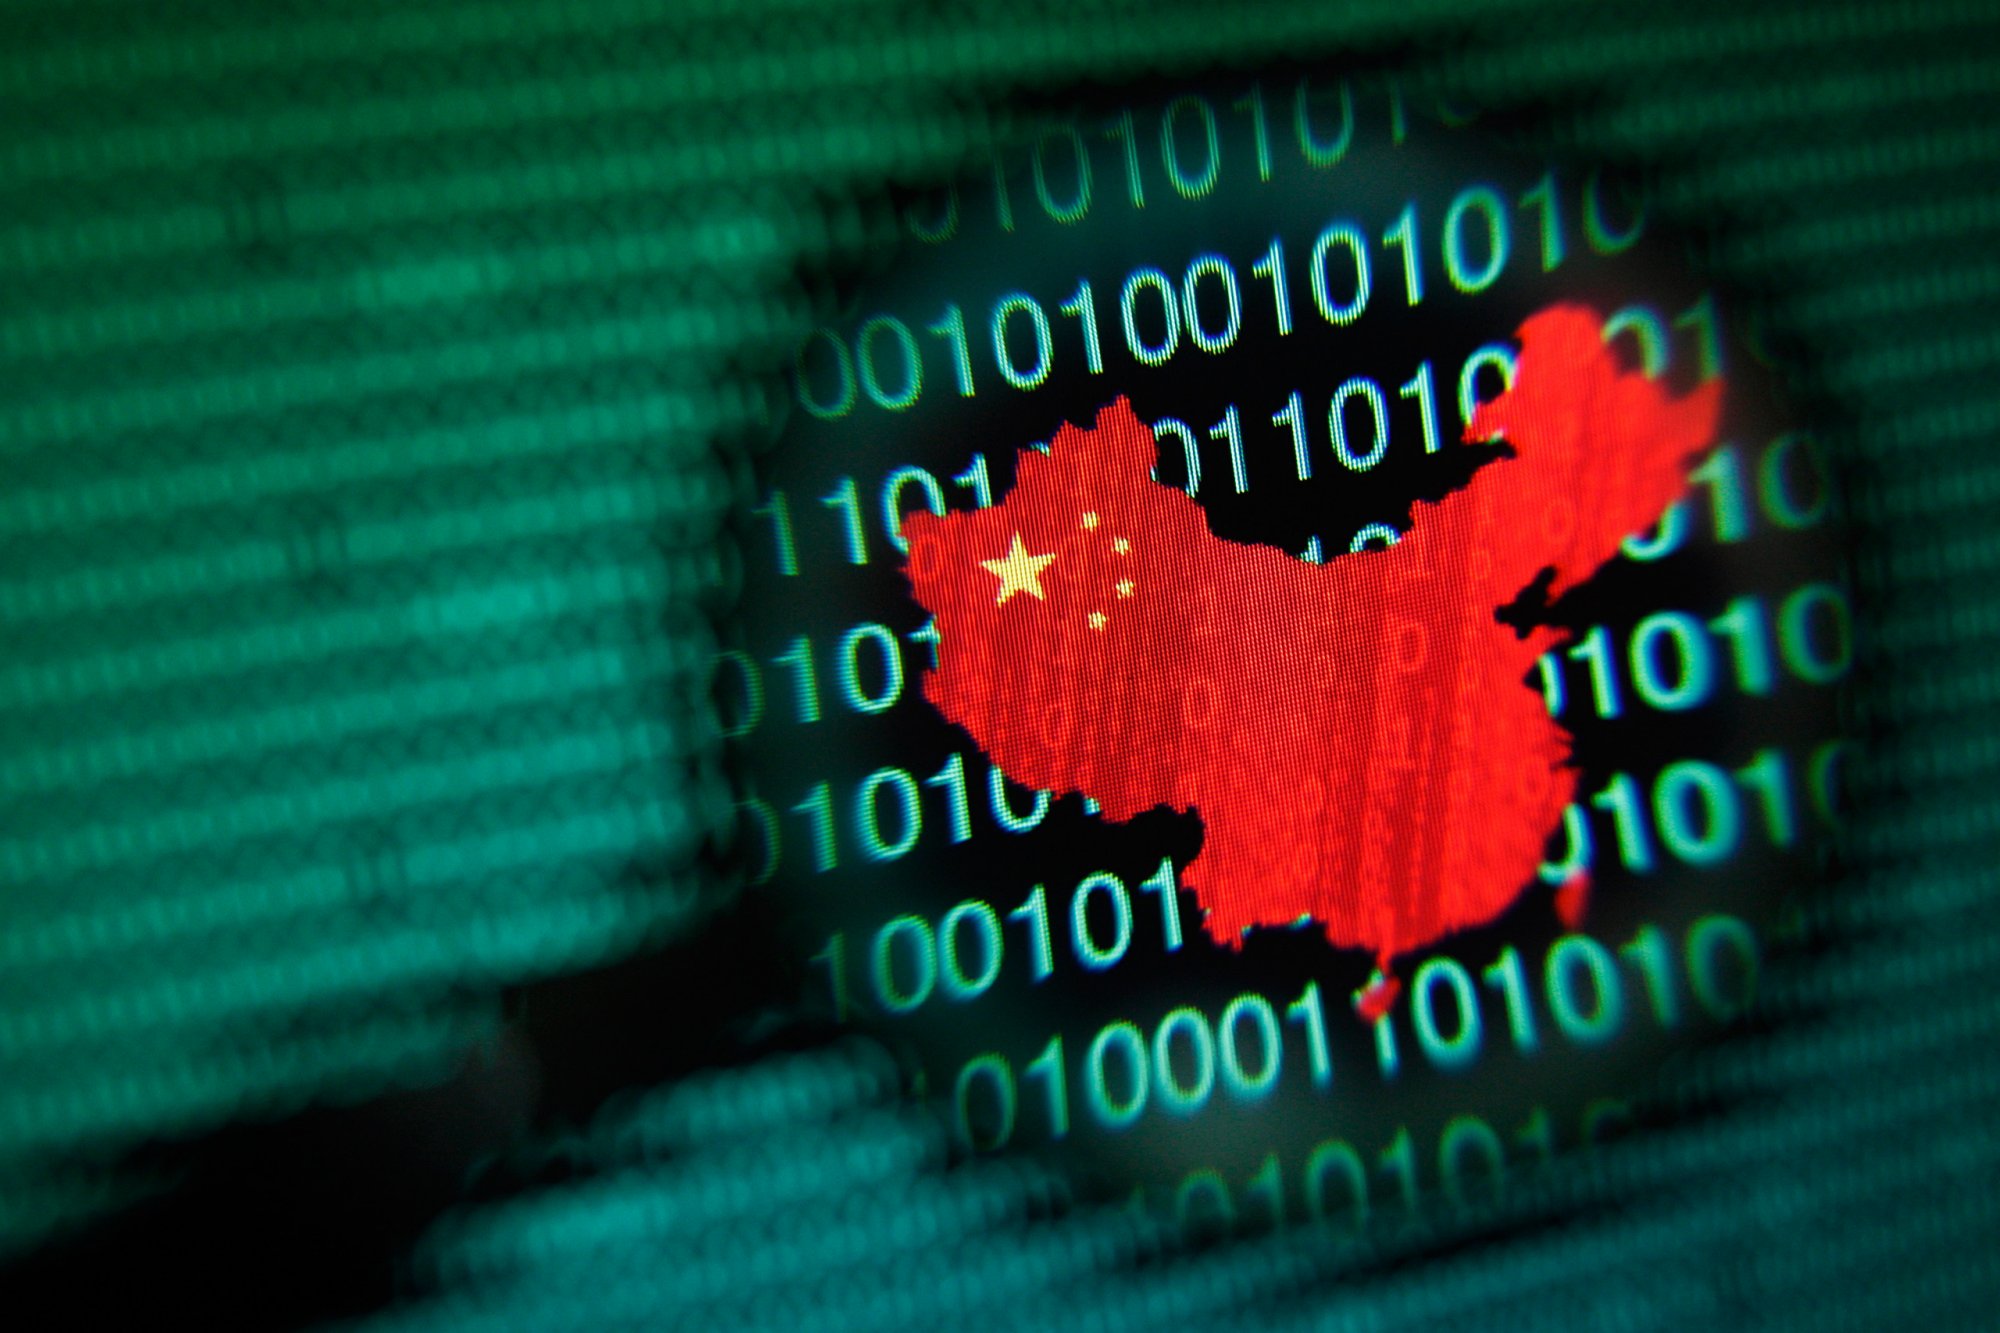 Despite cyber agreement, State Dept. says China is continuing to launch attacks at U.S. systems